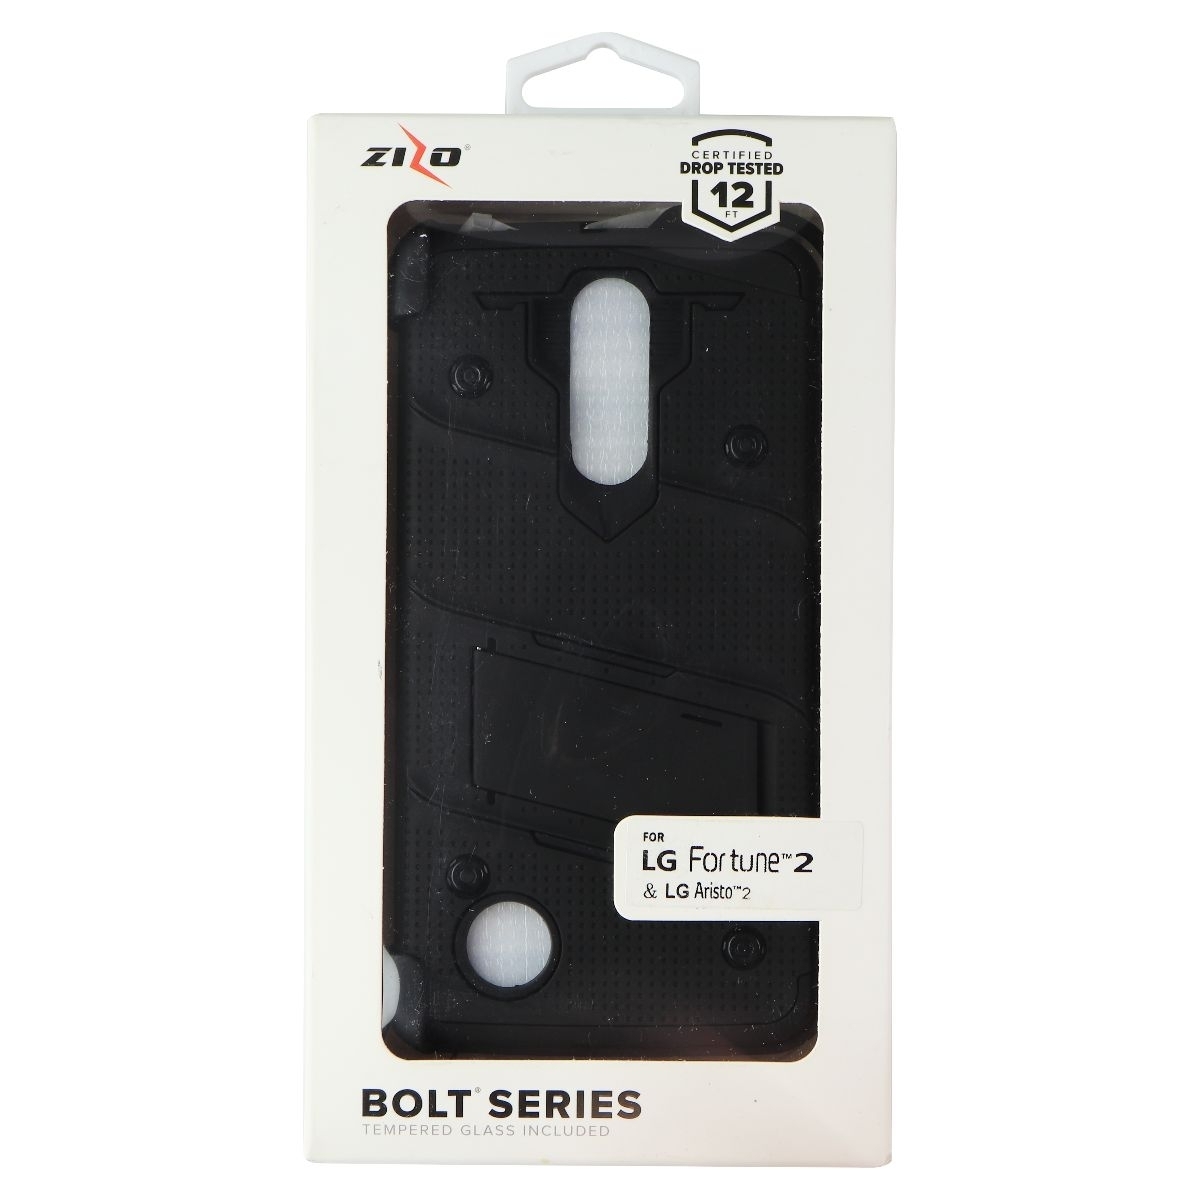 Zizo Bolt Series Case And Holster For LG Fortune 2 / Aristo 2 - Black (Refurbished)